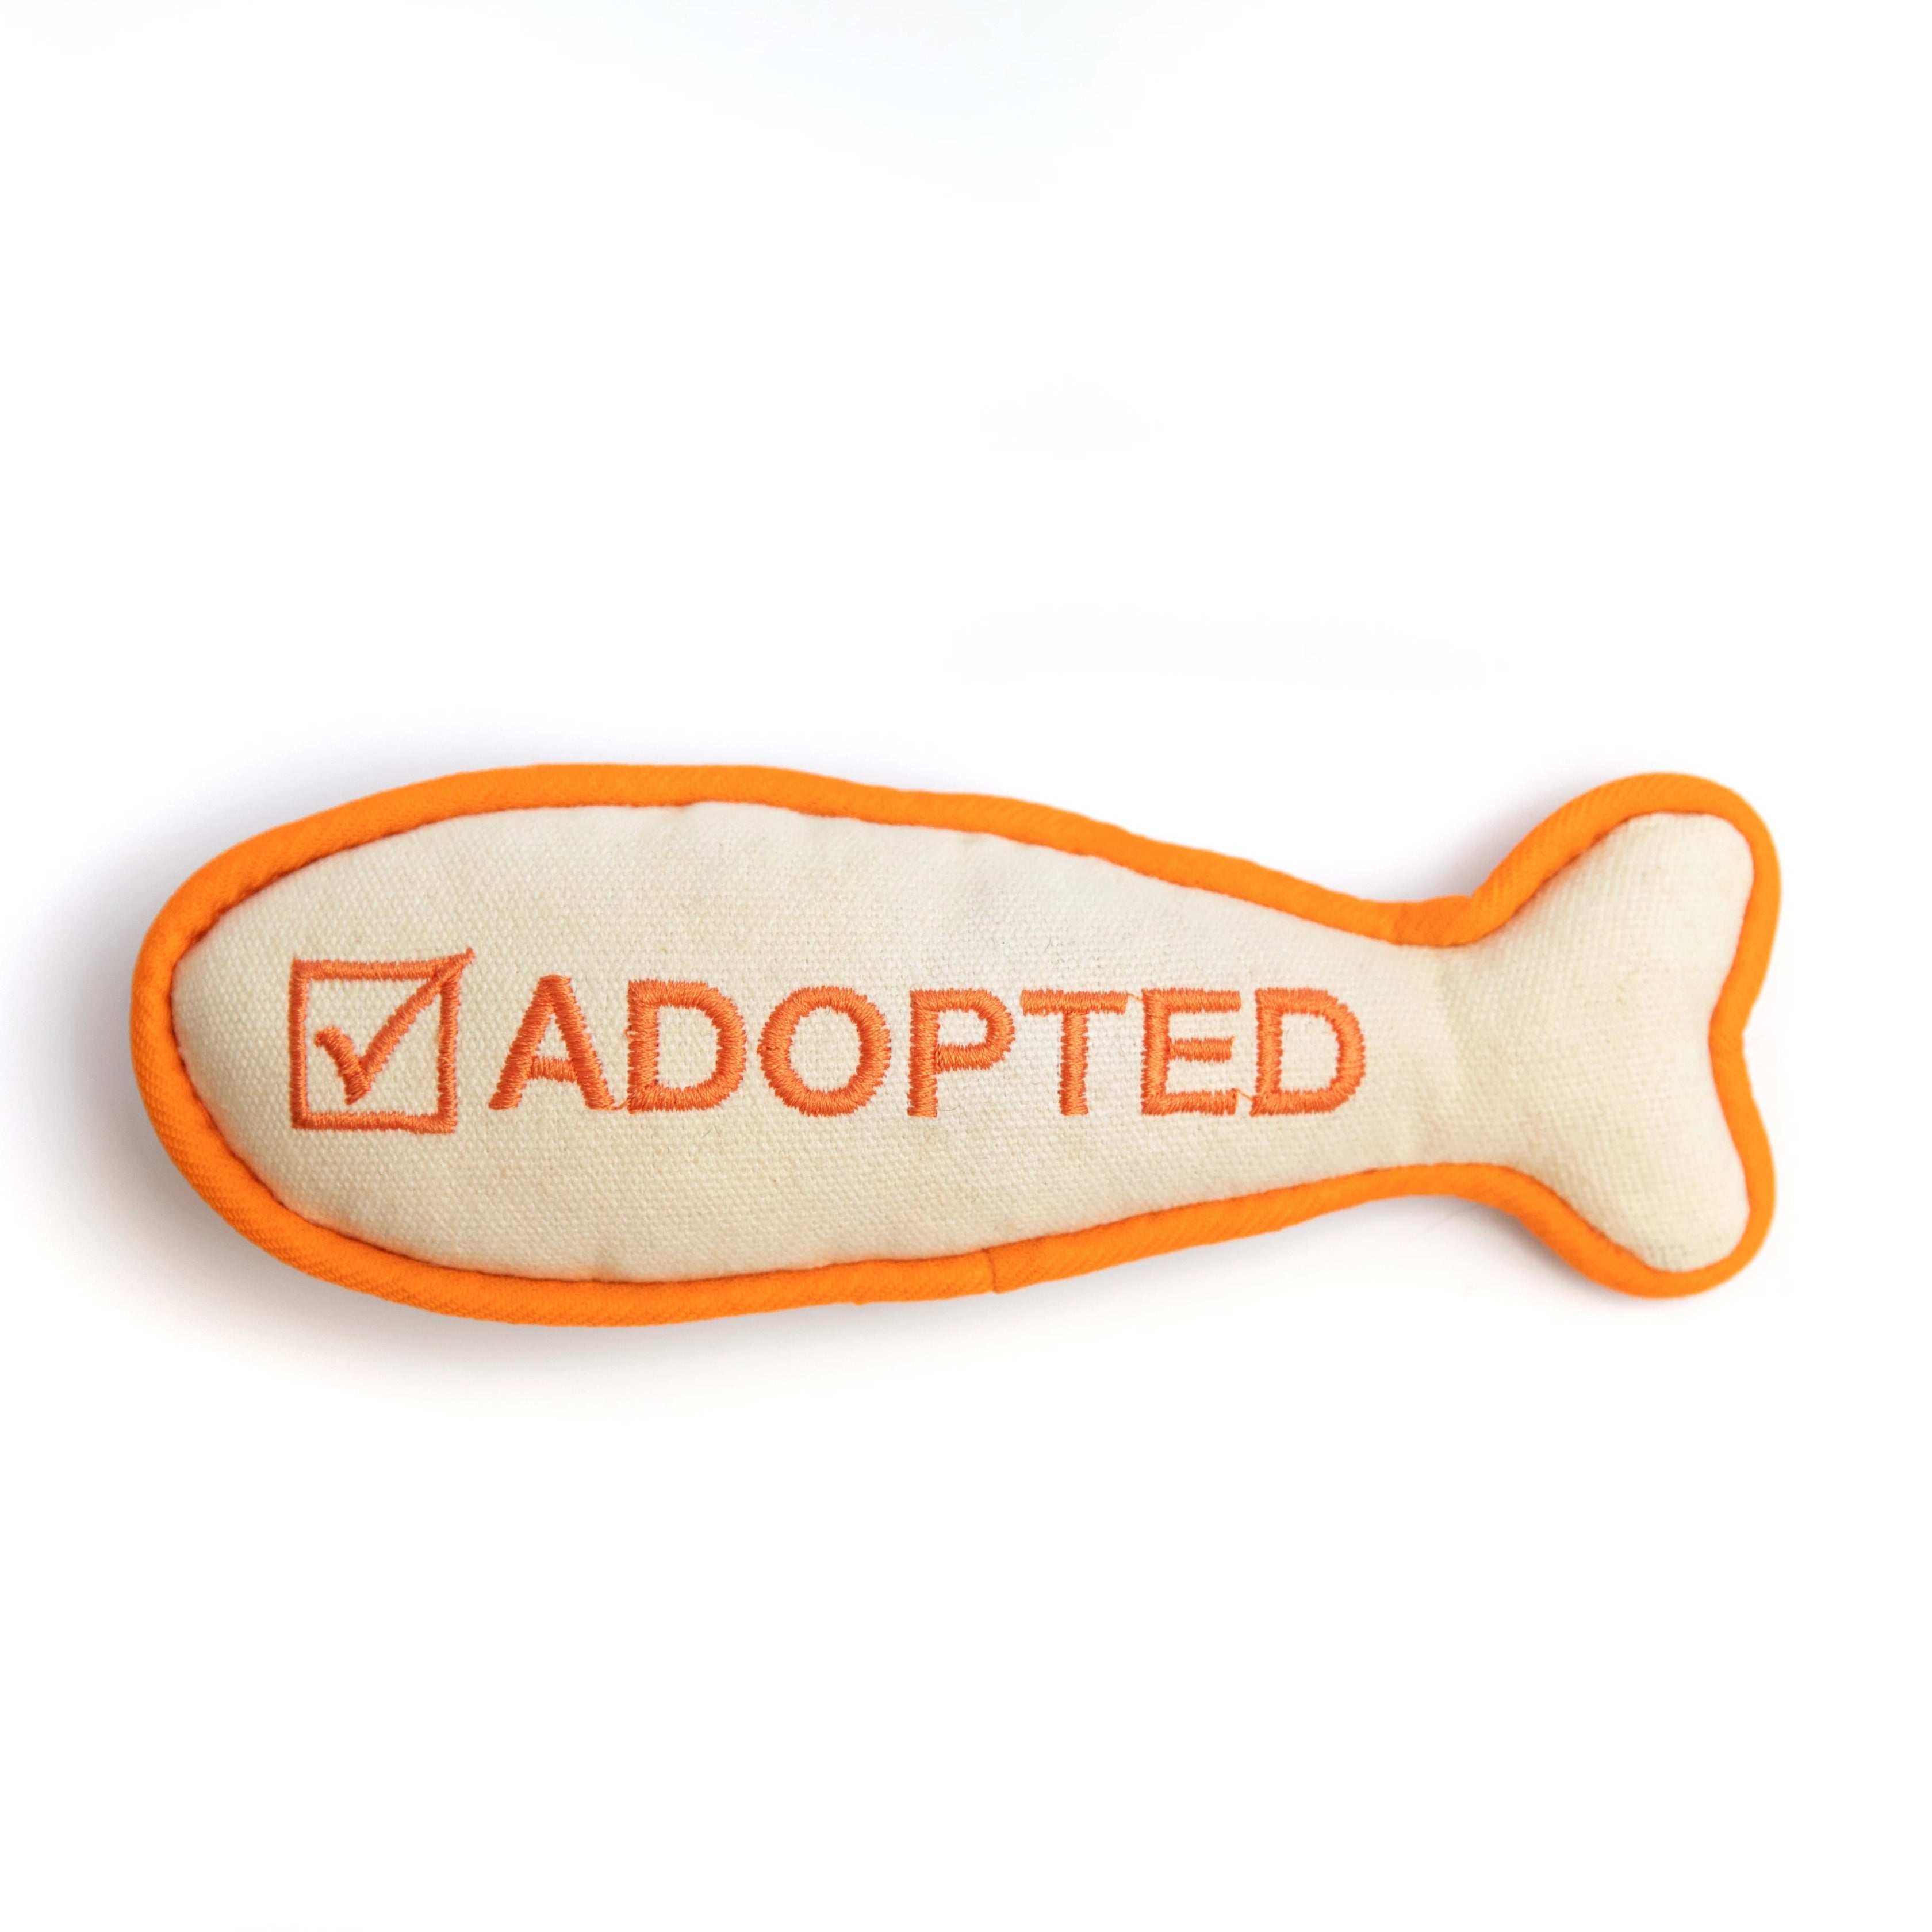 Adopted Cat Toy